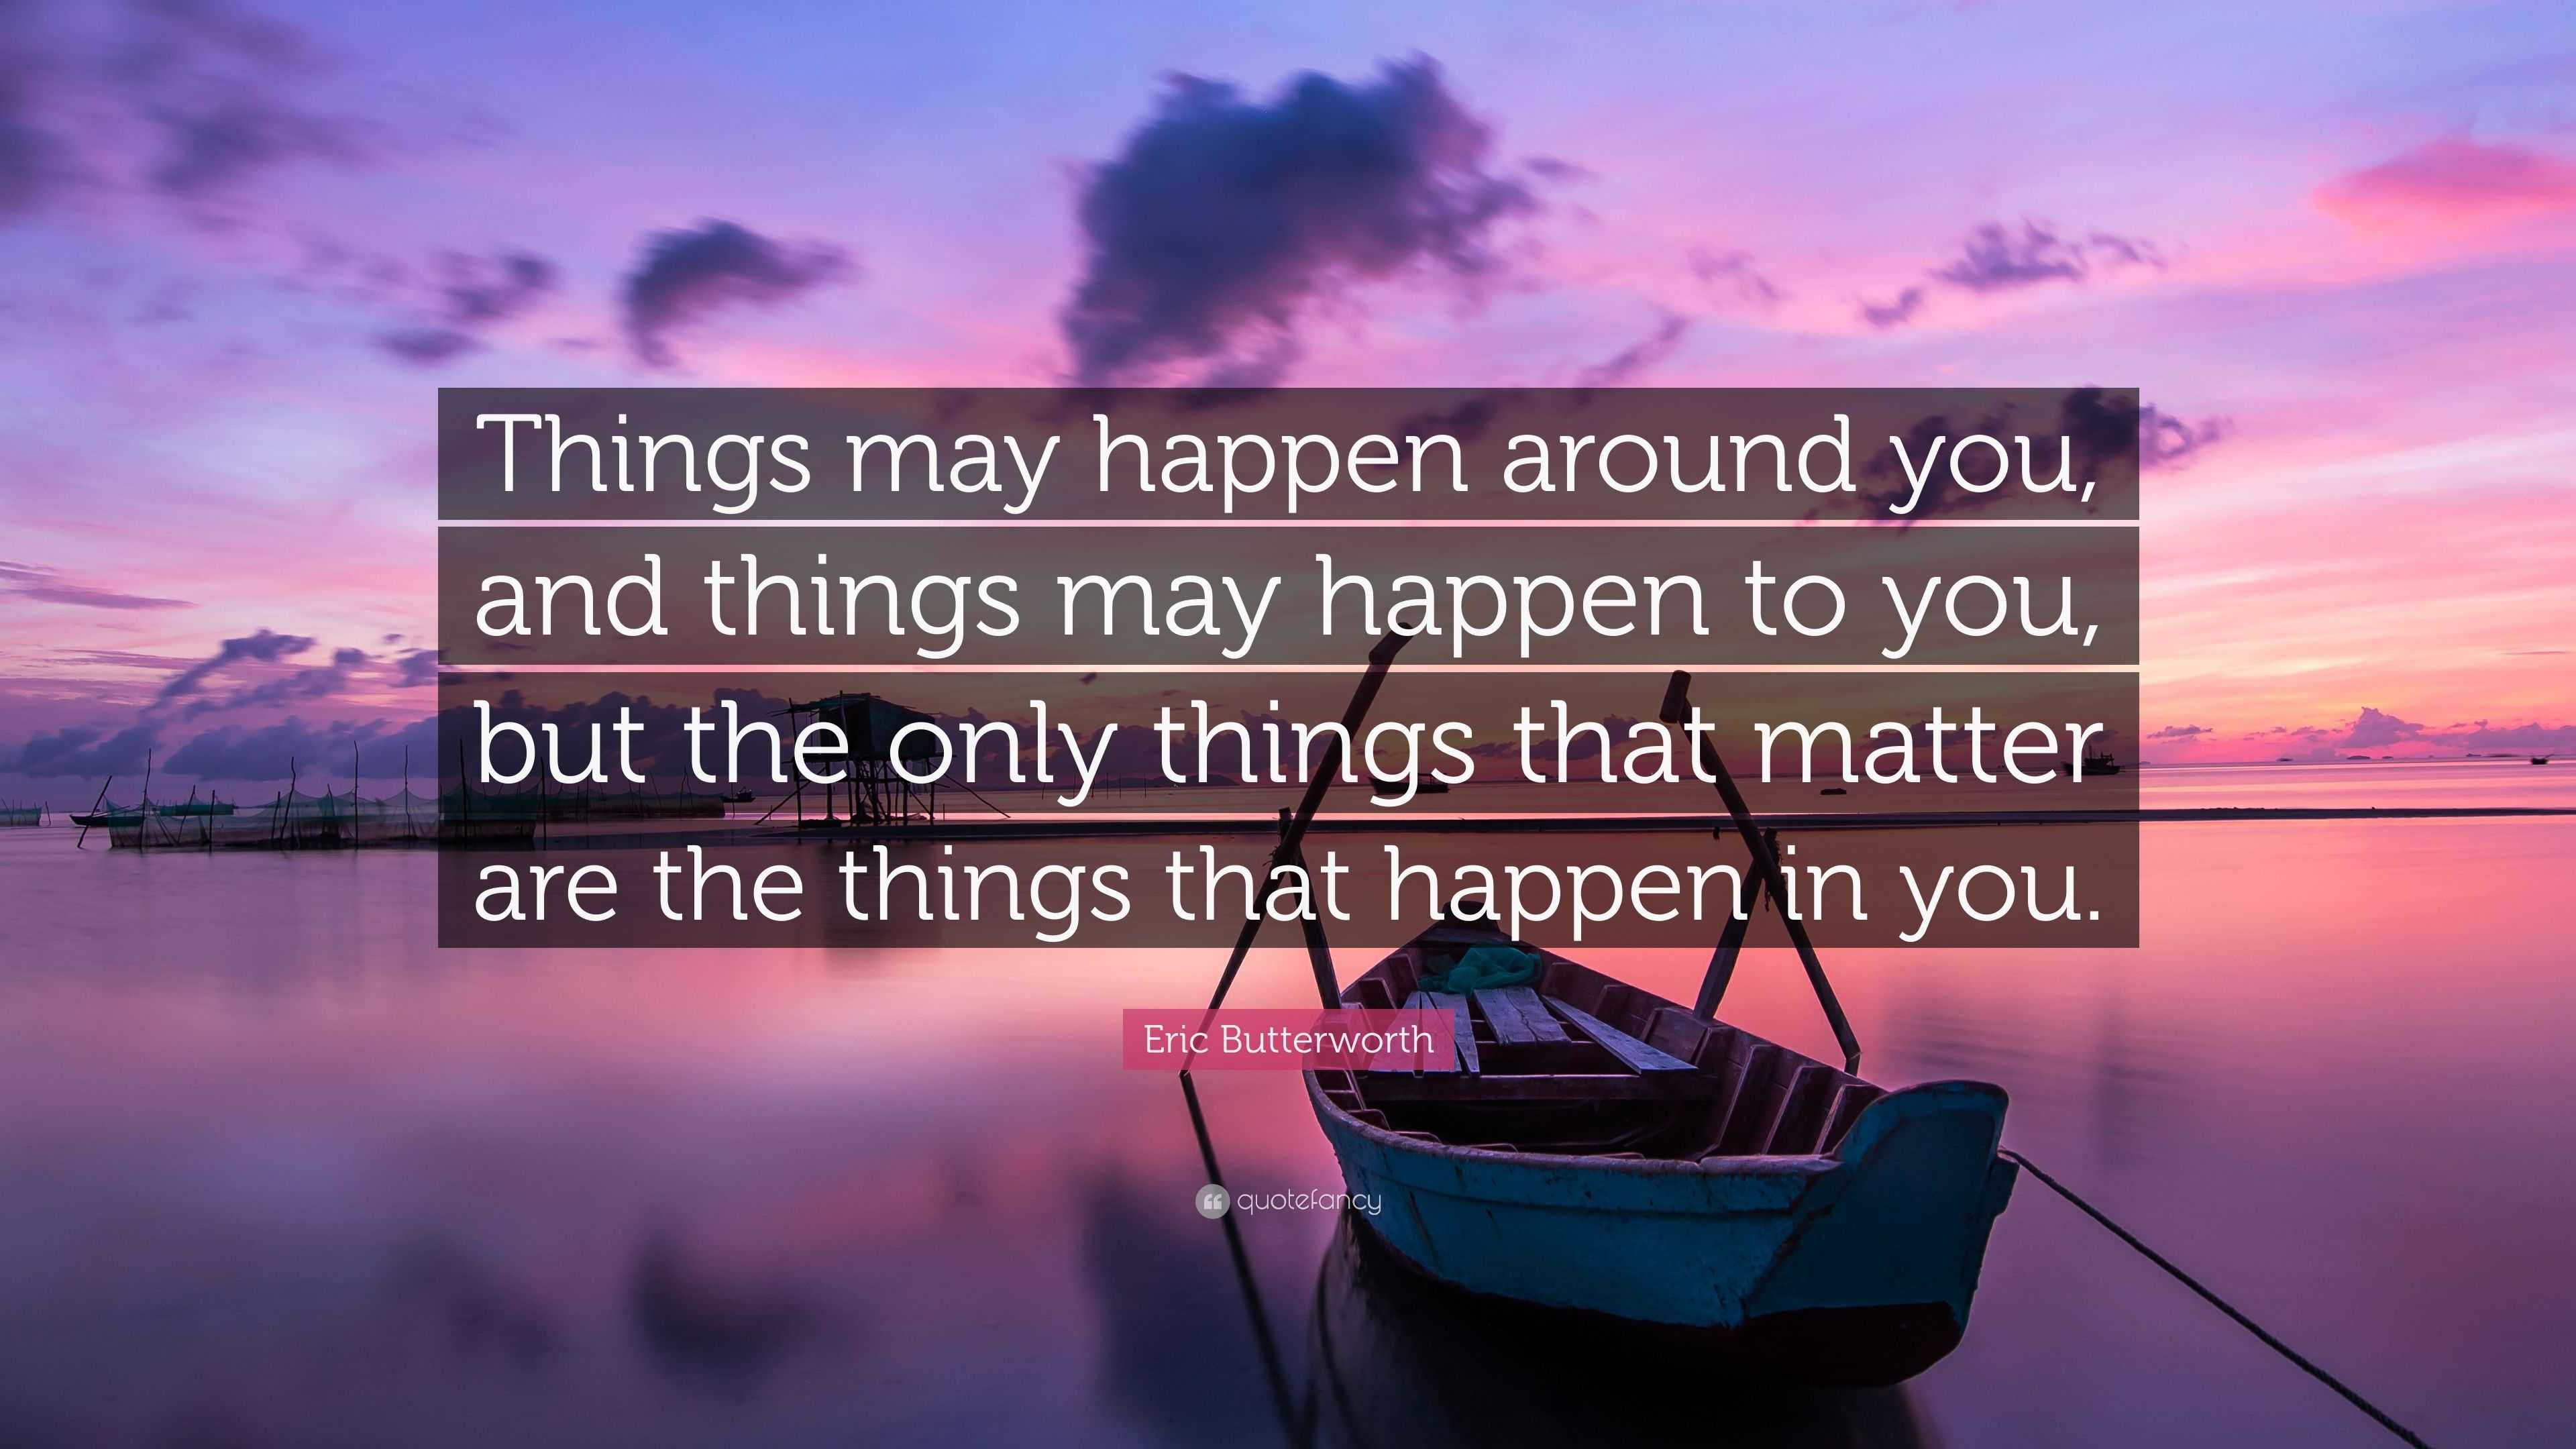 Eric Butterworth Quote “Things may happen around you, and things may